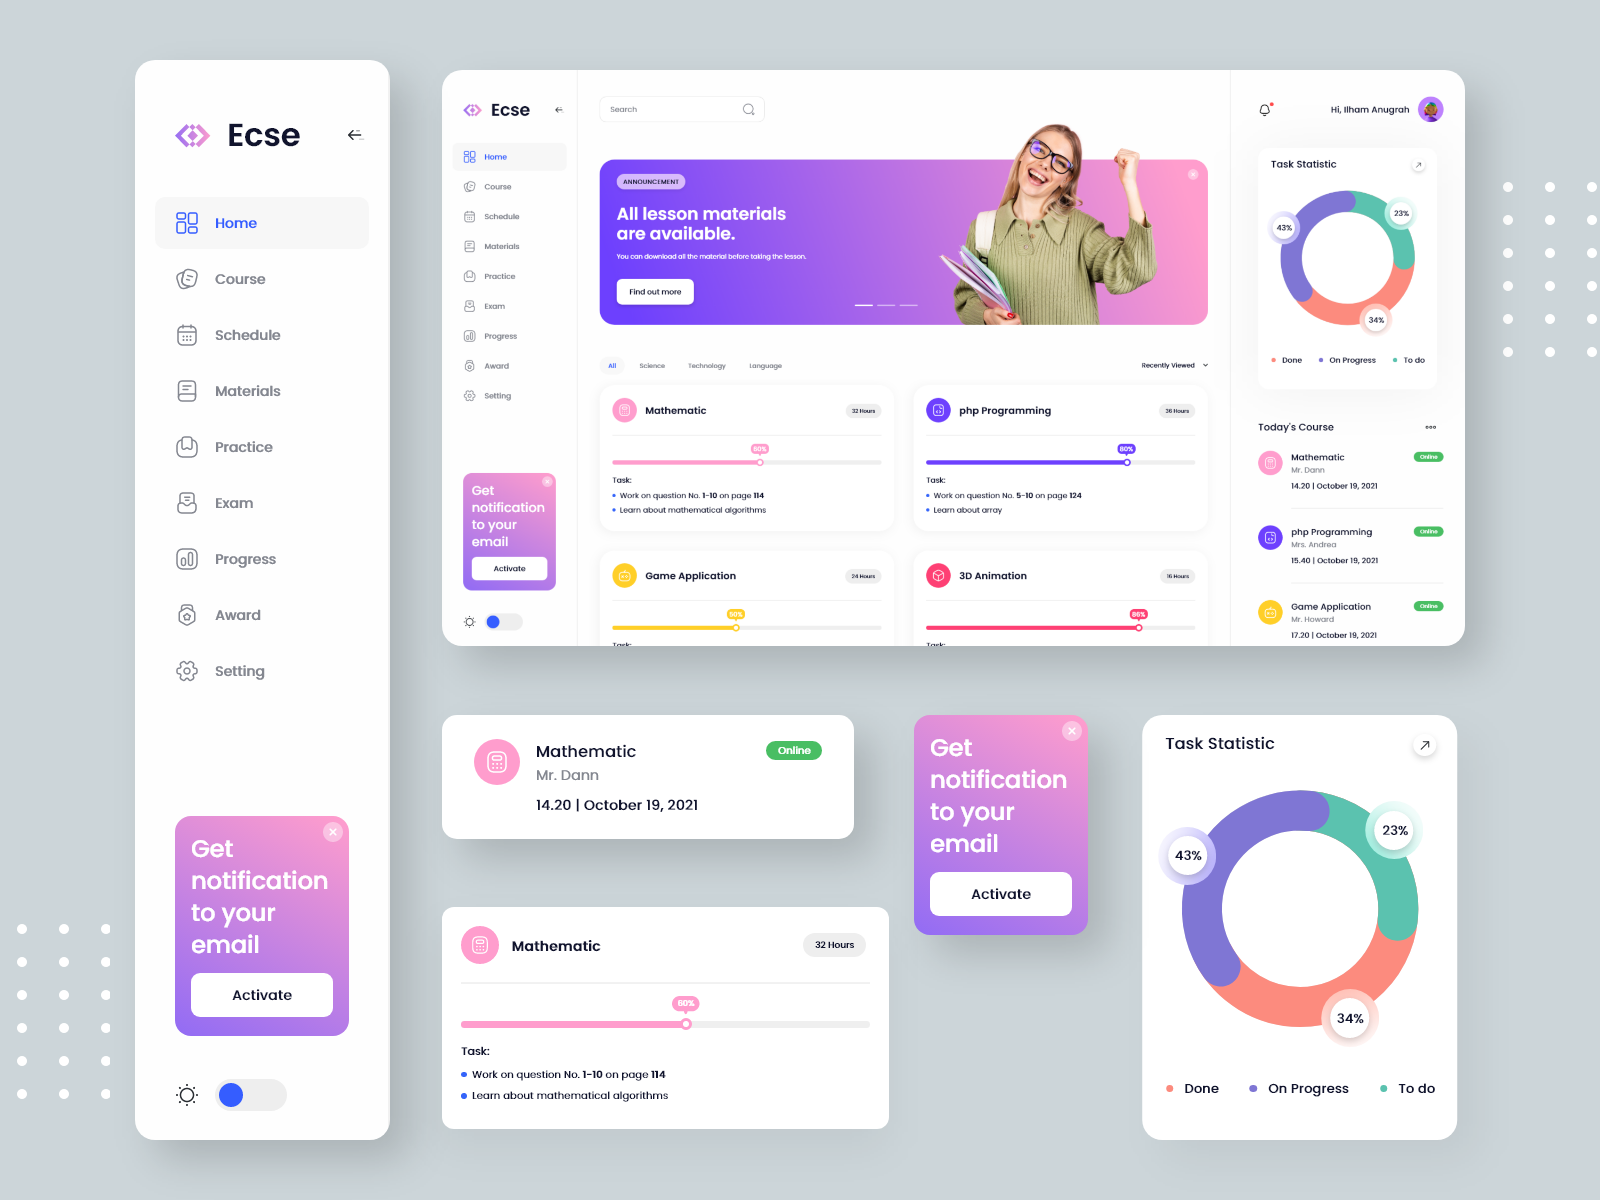 Course Dashboard by Ilham Anugrah on Dribbble